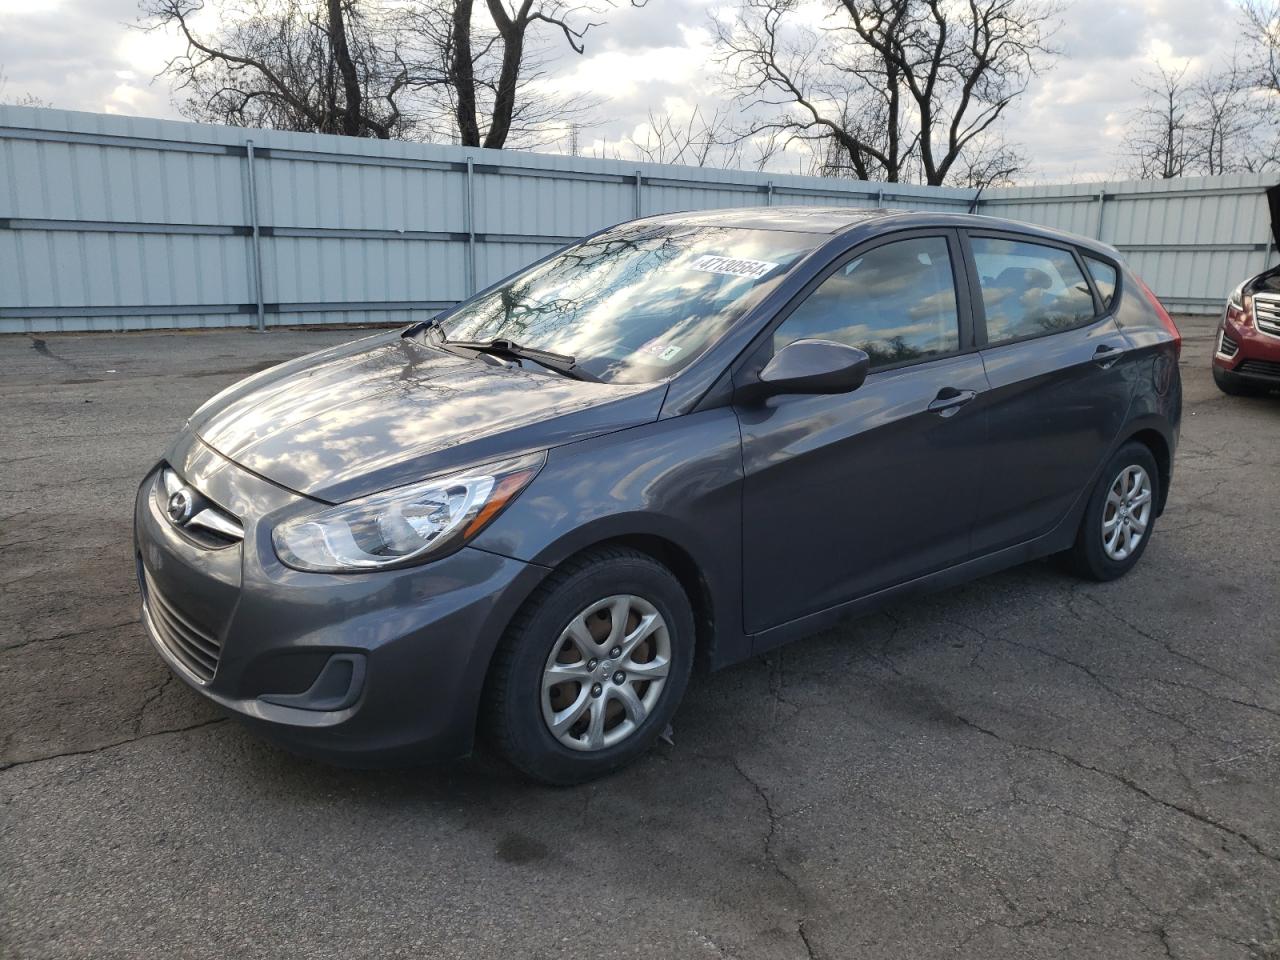 vin: KMHCT5AE7DU082606 KMHCT5AE7DU082606 2013 hyundai accent 1600 for Sale in 15122 3431, Pa - Pittsburgh West, West Mifflin, USA